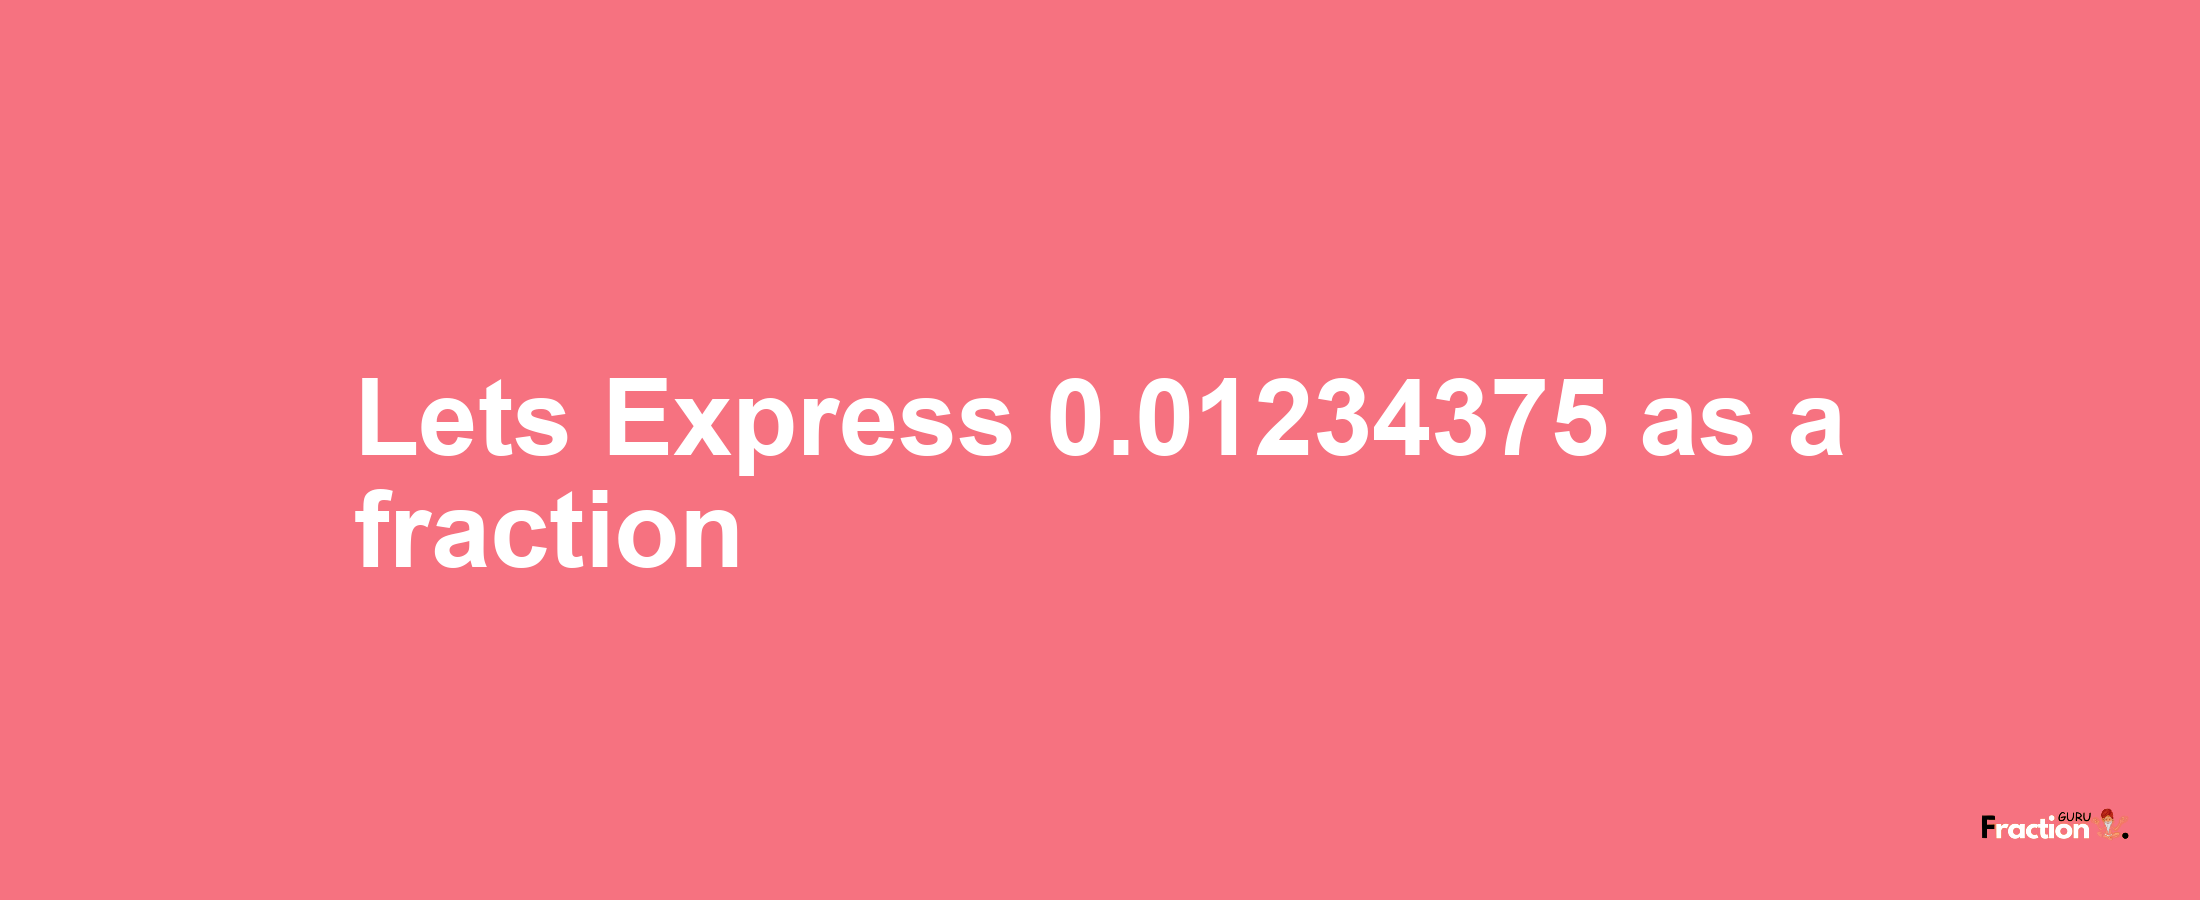 Lets Express 0.01234375 as afraction